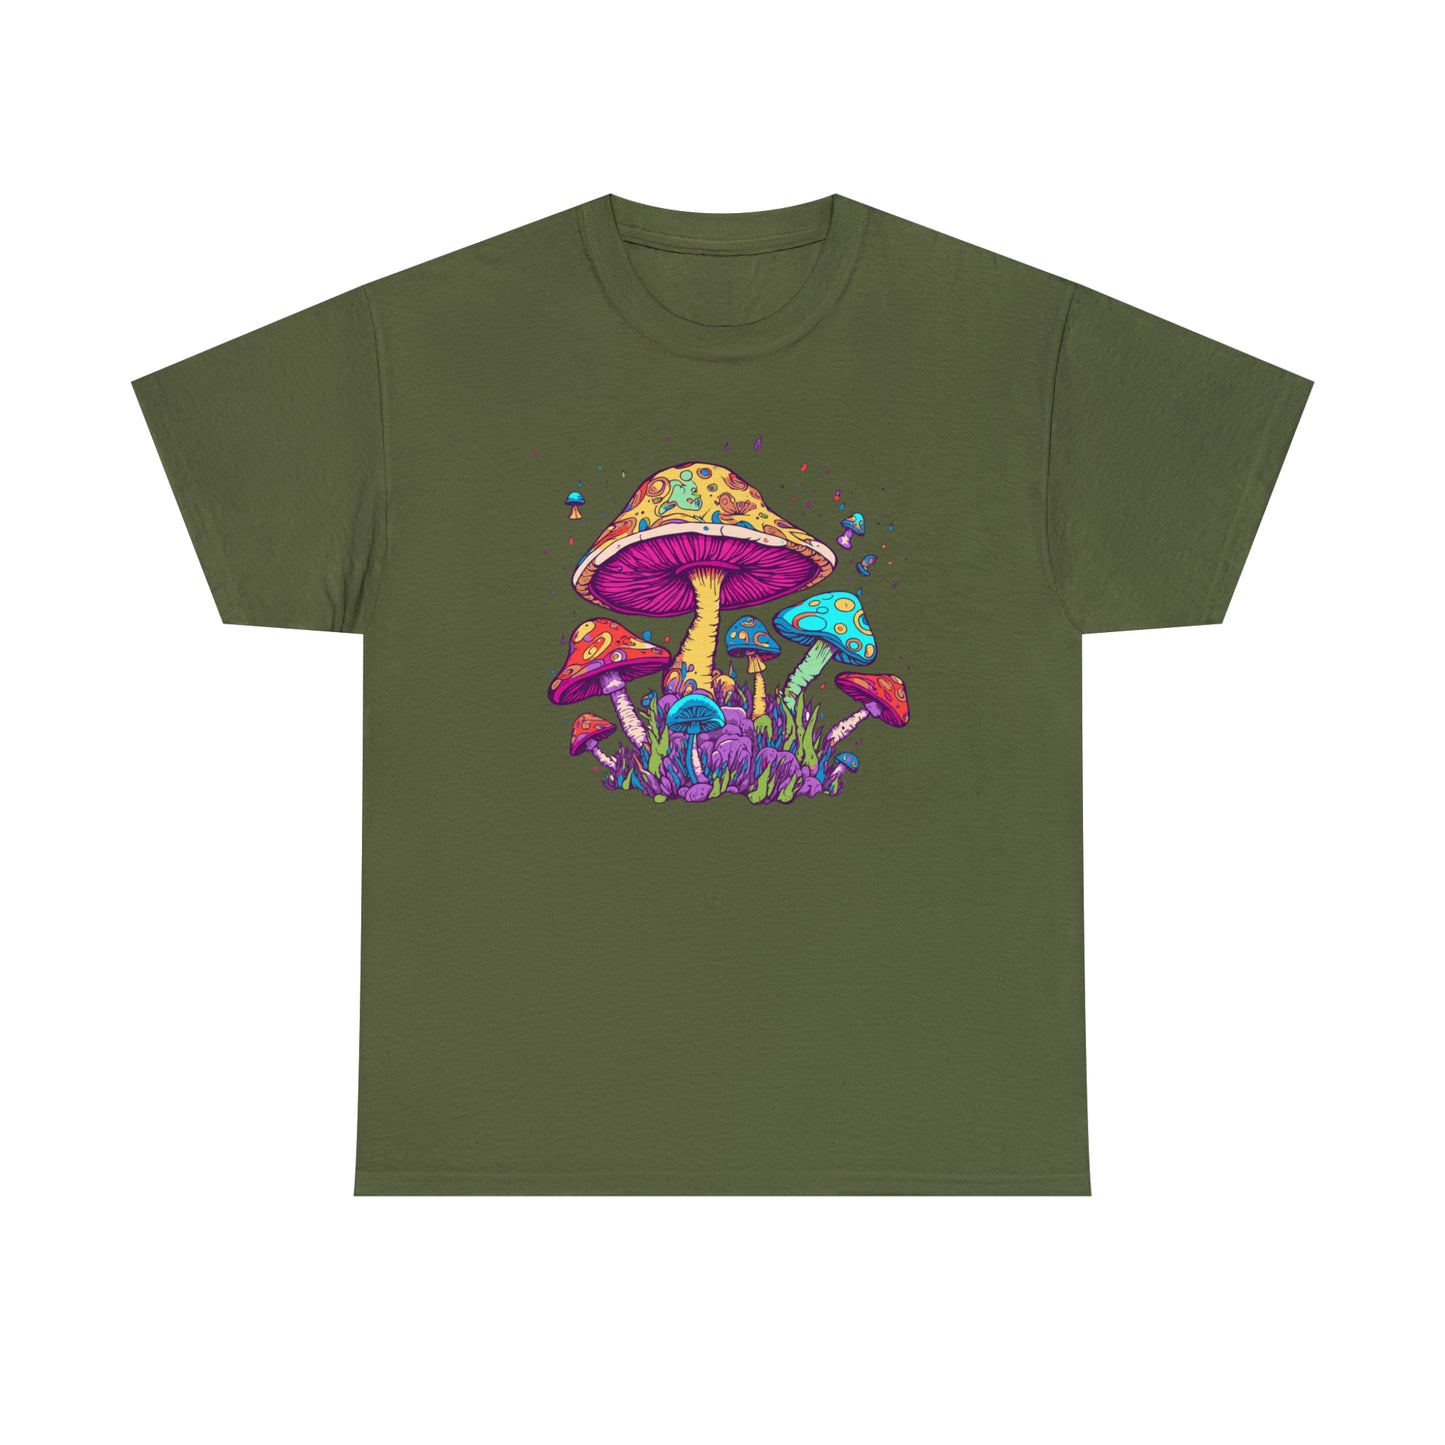 Mushrooms T-Shirt With Psychedelic Mushrooms TShirt For Neon Shrooms T Shirt With Colorful Mushrooms Tee For Hippy Shirt For Groovy Fungi Shirt